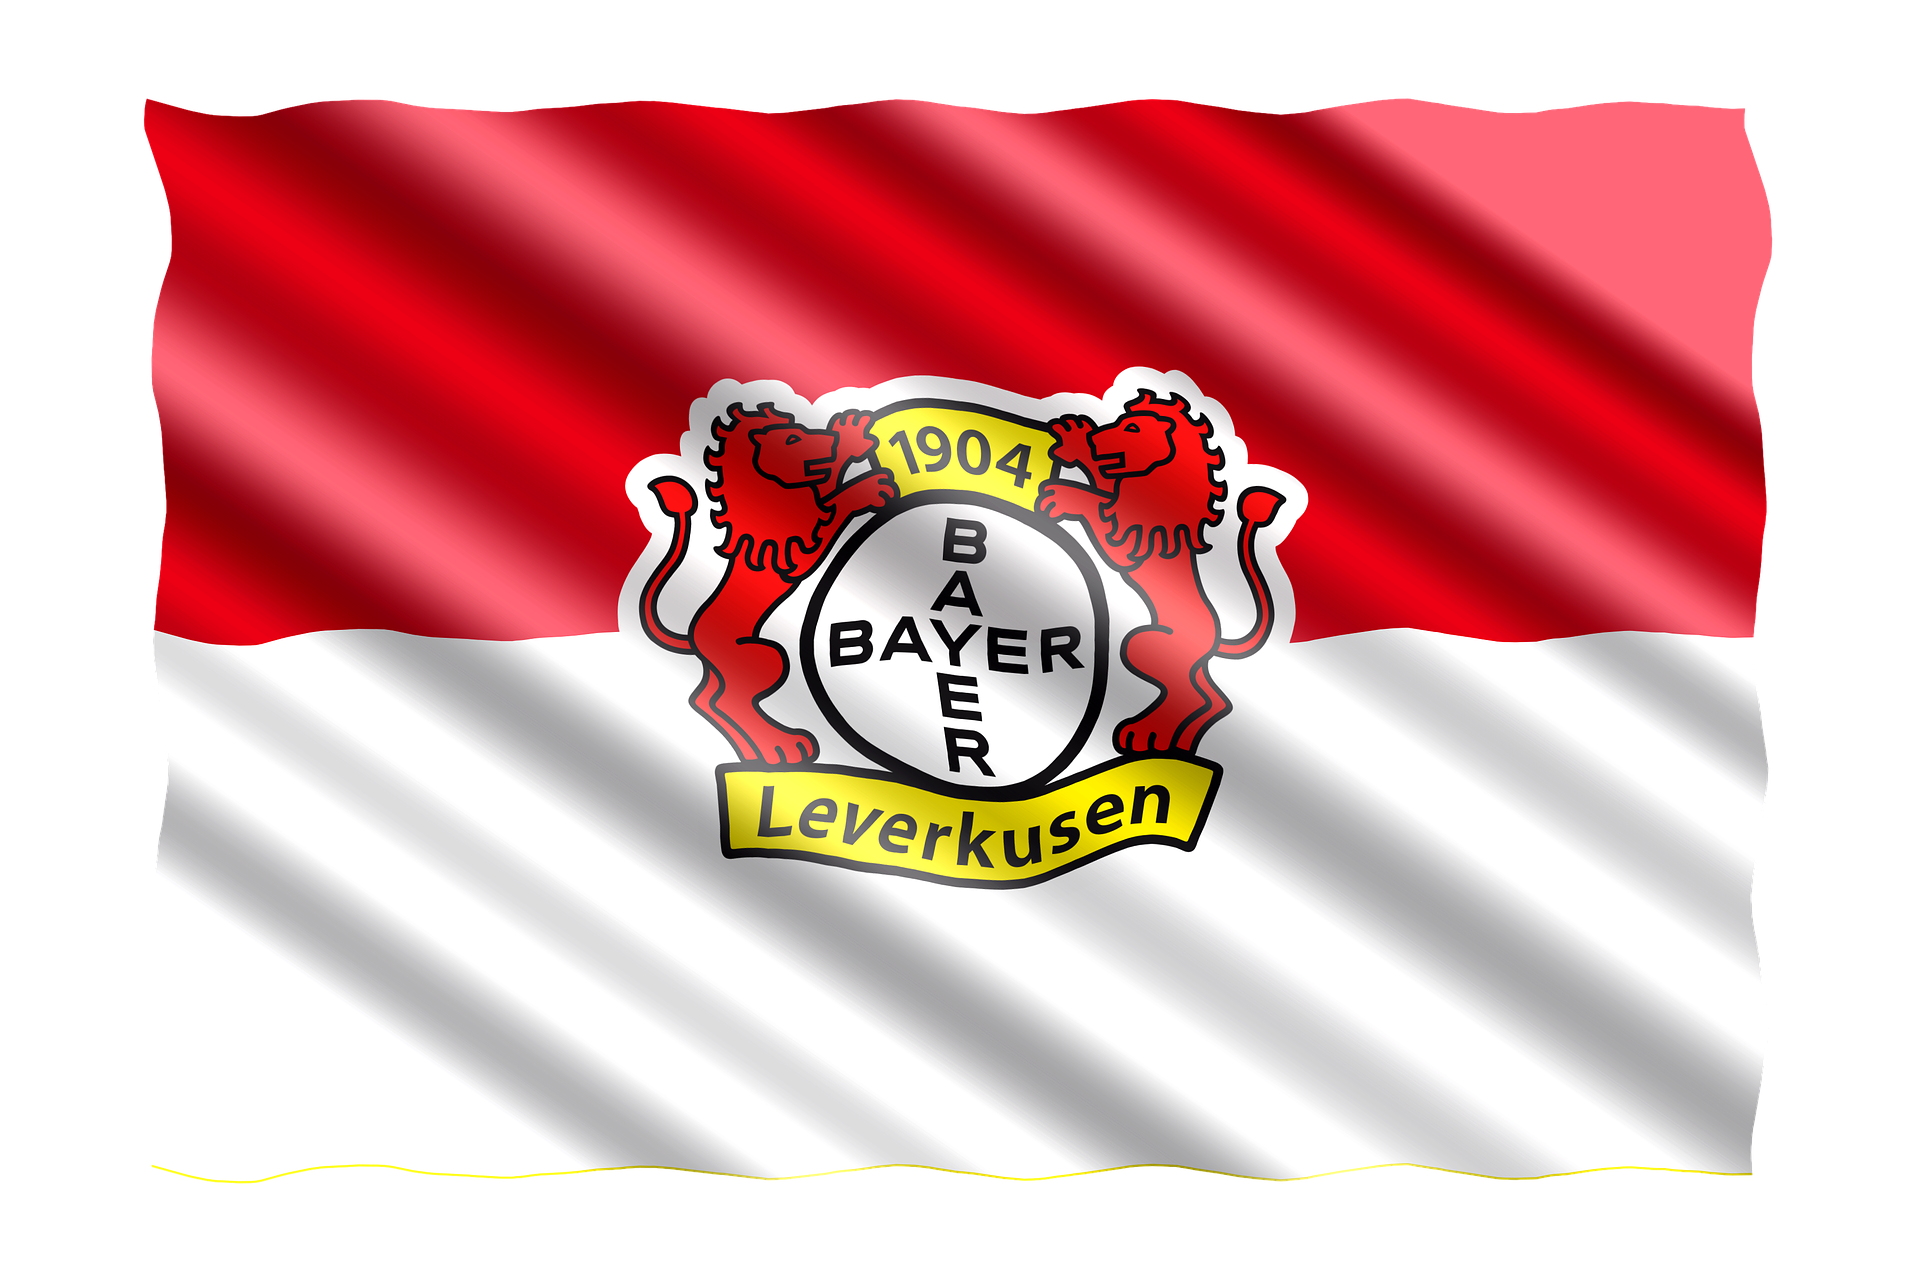 The Flag of Bayer Leverkusen with a logo